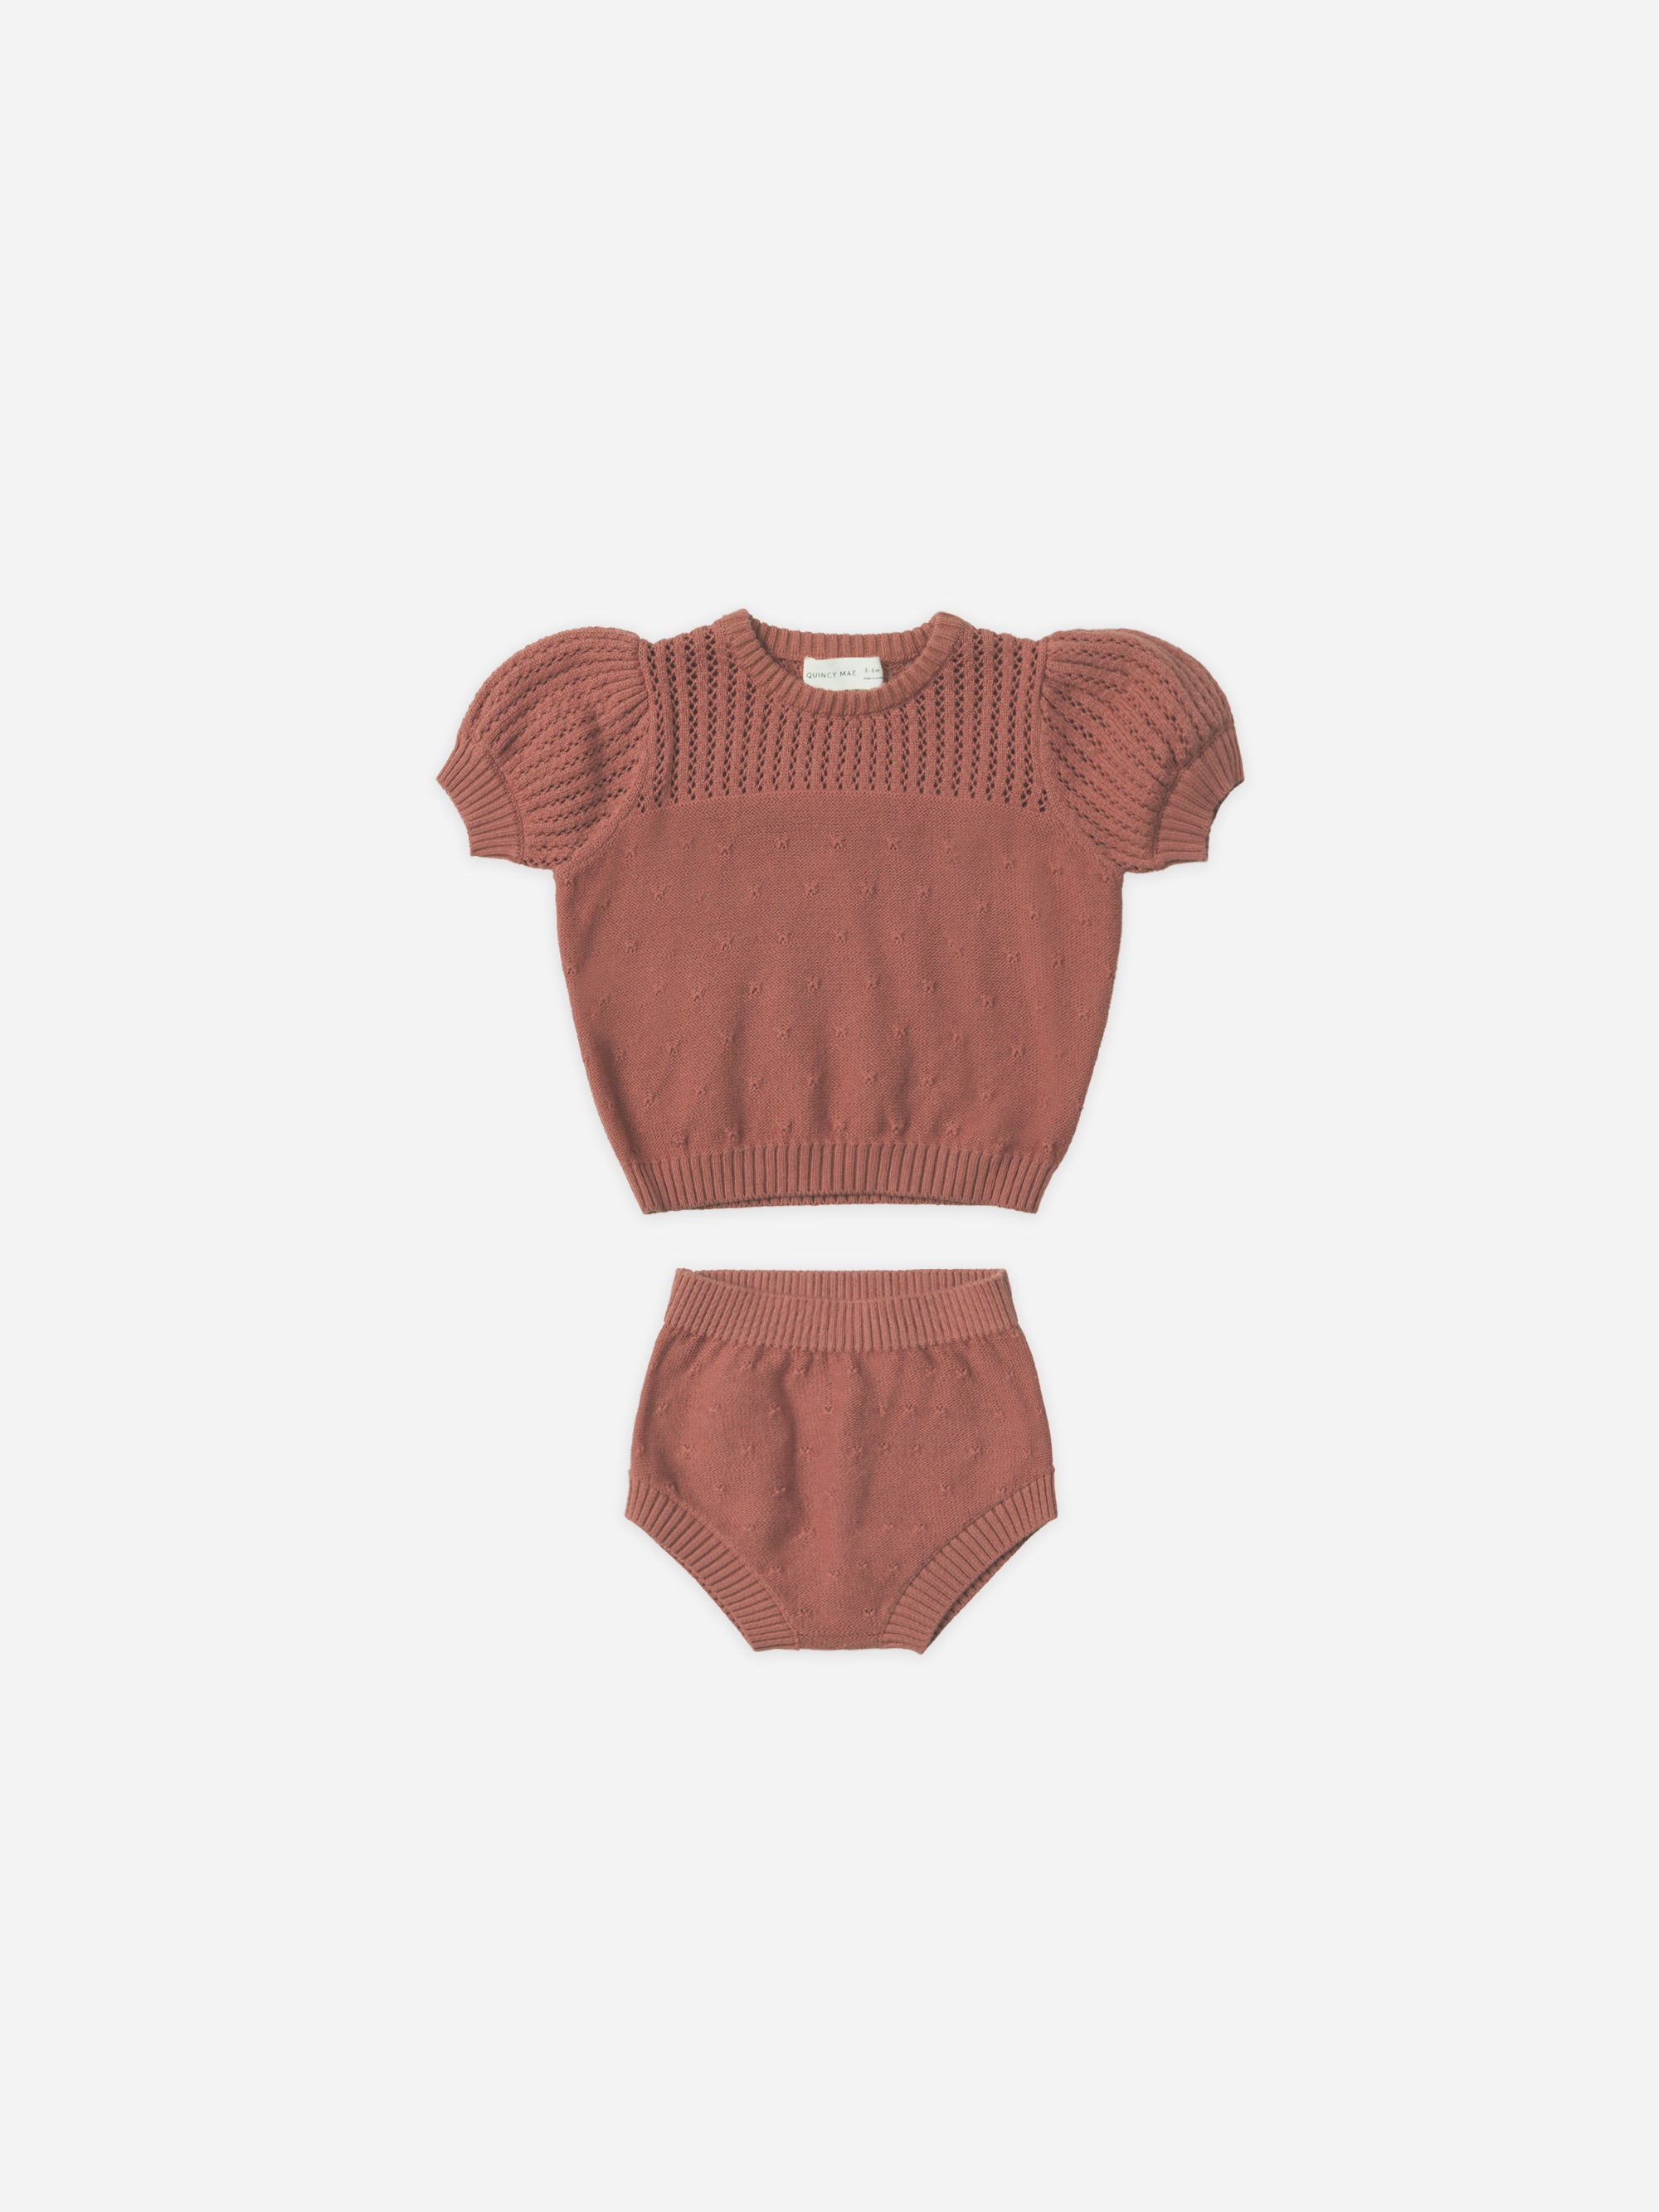 Pointelle Knit Set || Berry - Rylee + Cru | Kids Clothes | Trendy Baby Clothes | Modern Infant Outfits |